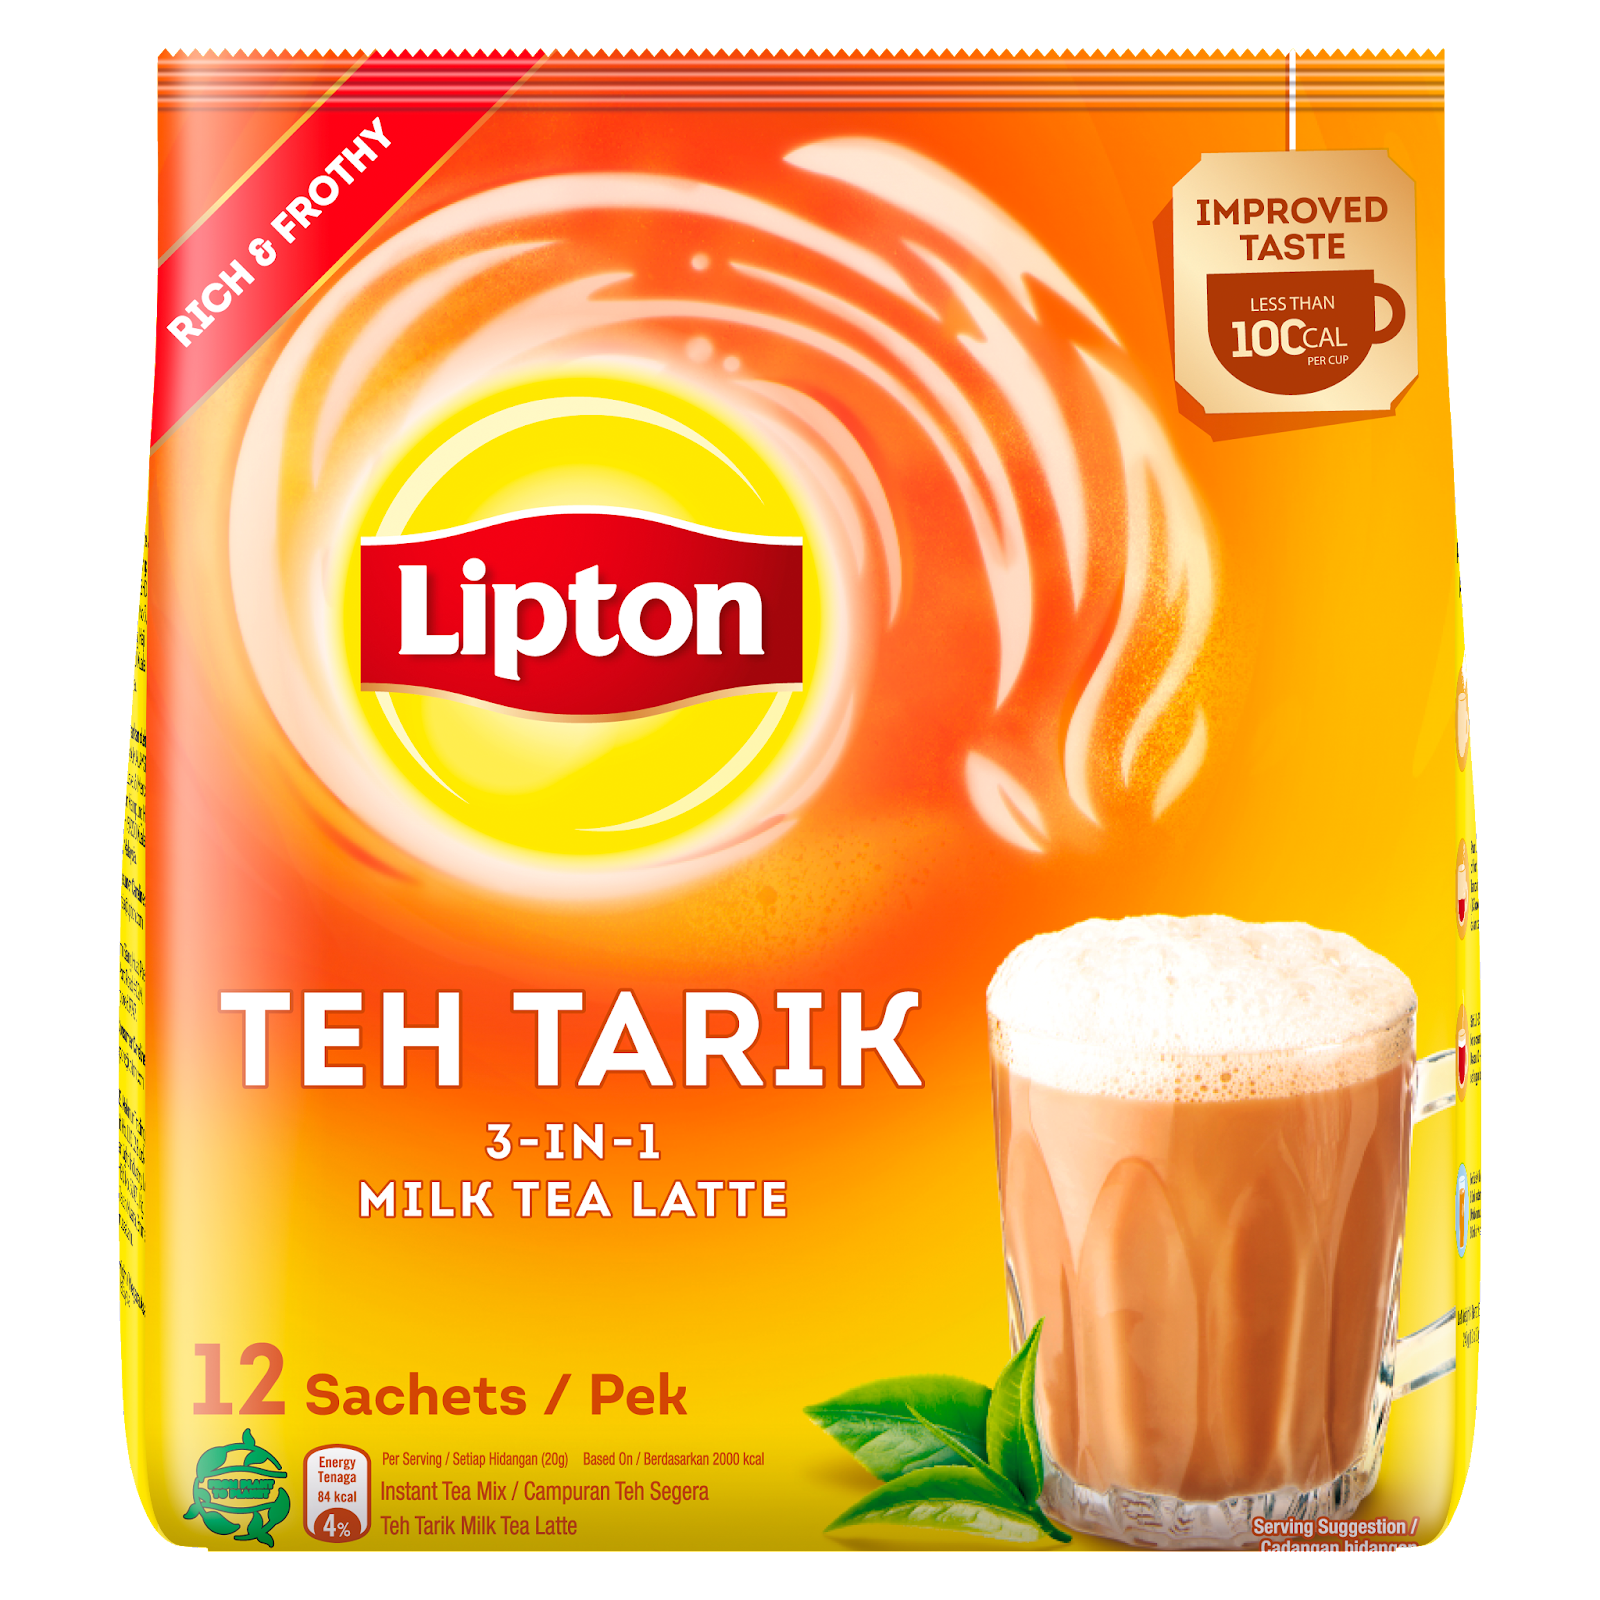 Teh tarik getting more expensive nowadays? Make it yourself at home hasslefree with lipton 3-in-1 | weirdkaya